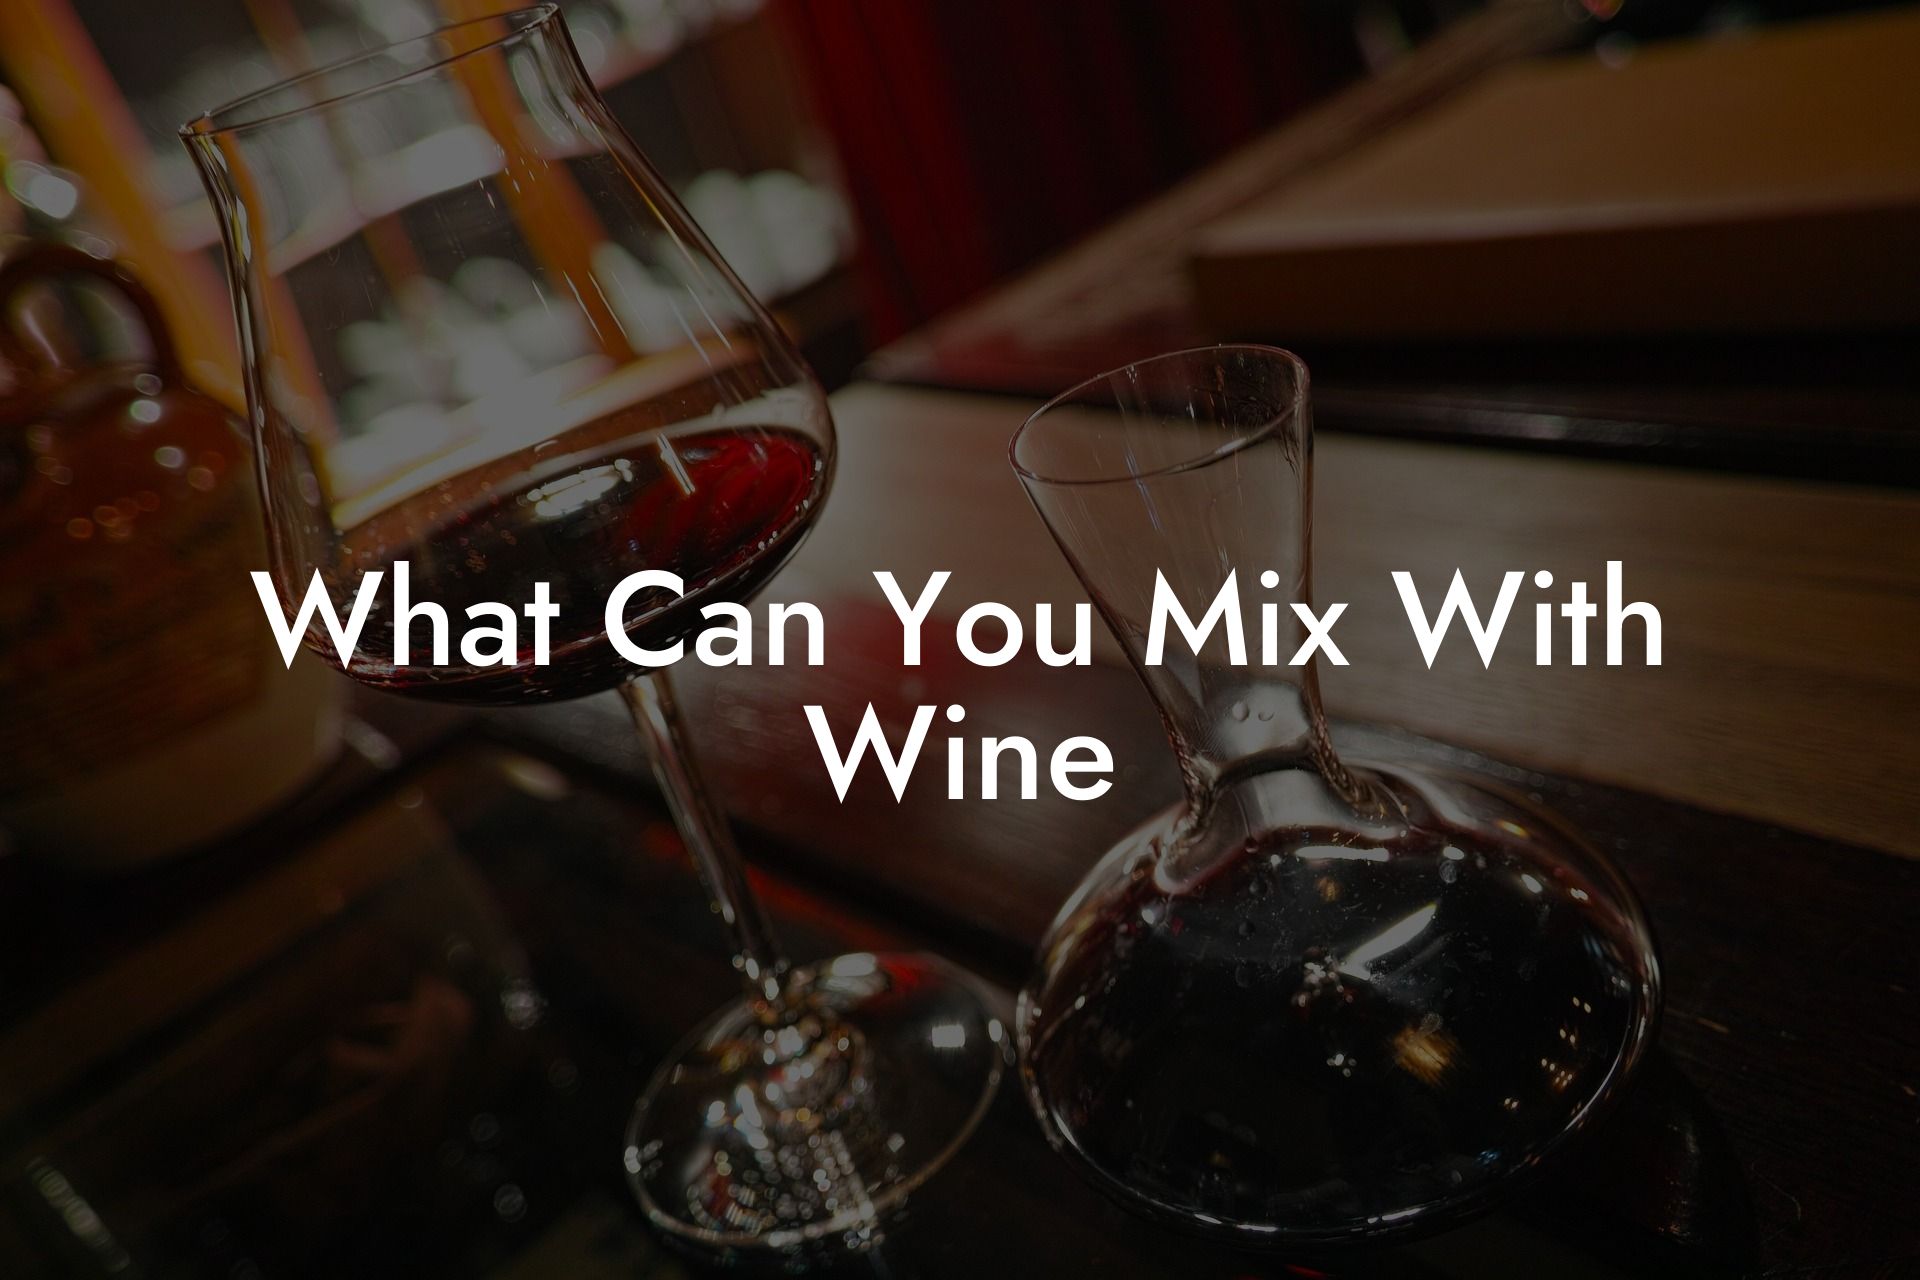 What Can You Mix With Wine